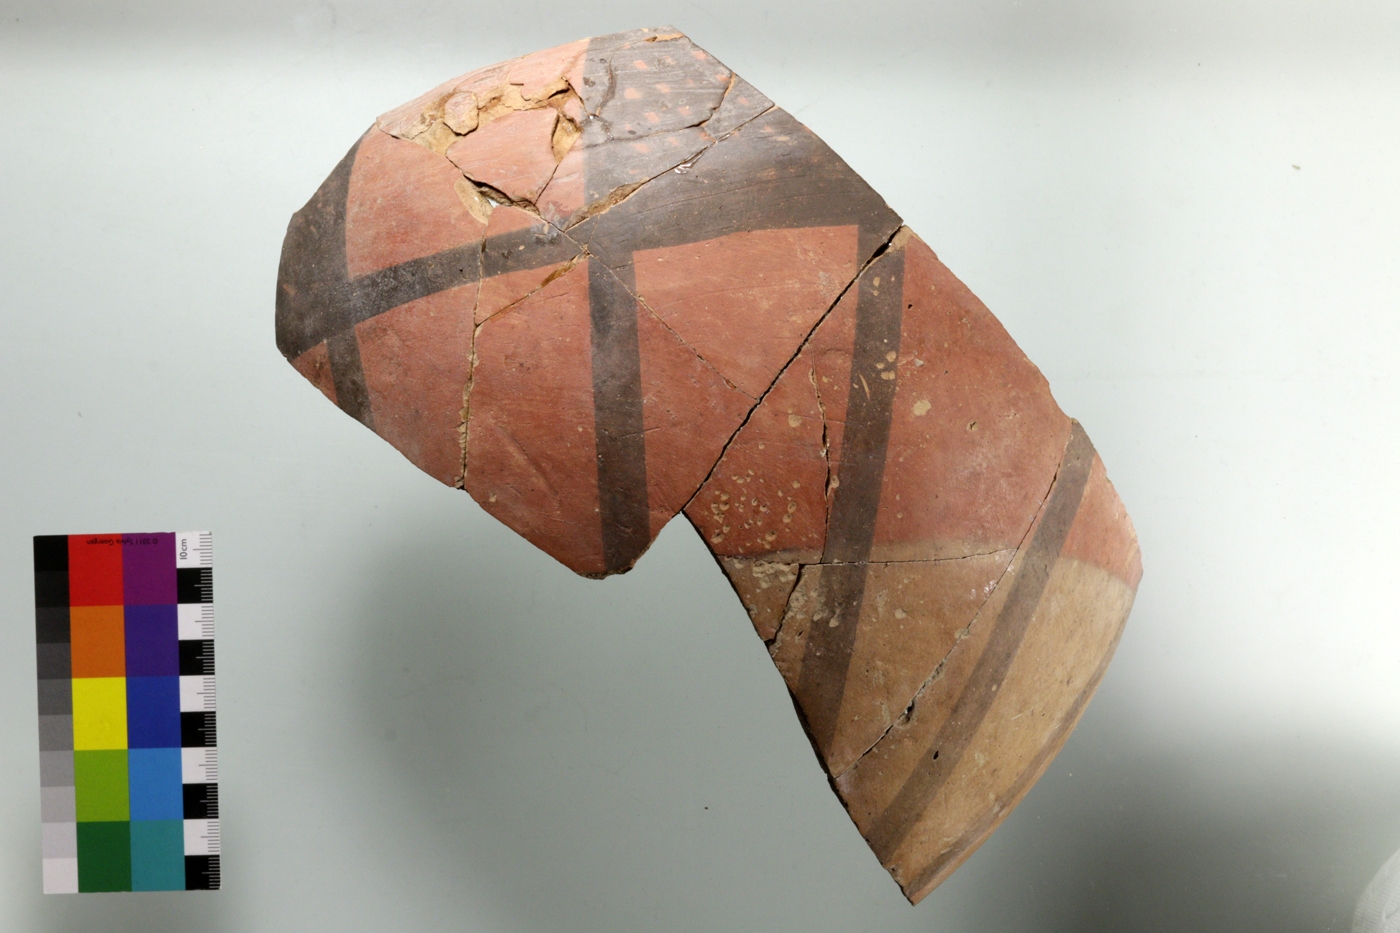 Large Meana Black on Red incurved rim bowl with crosshatched rectangles along the rim and lines towards the base. The lighter reddish color at the lower part is probably the result of firing the vessels that were stacked in one another.